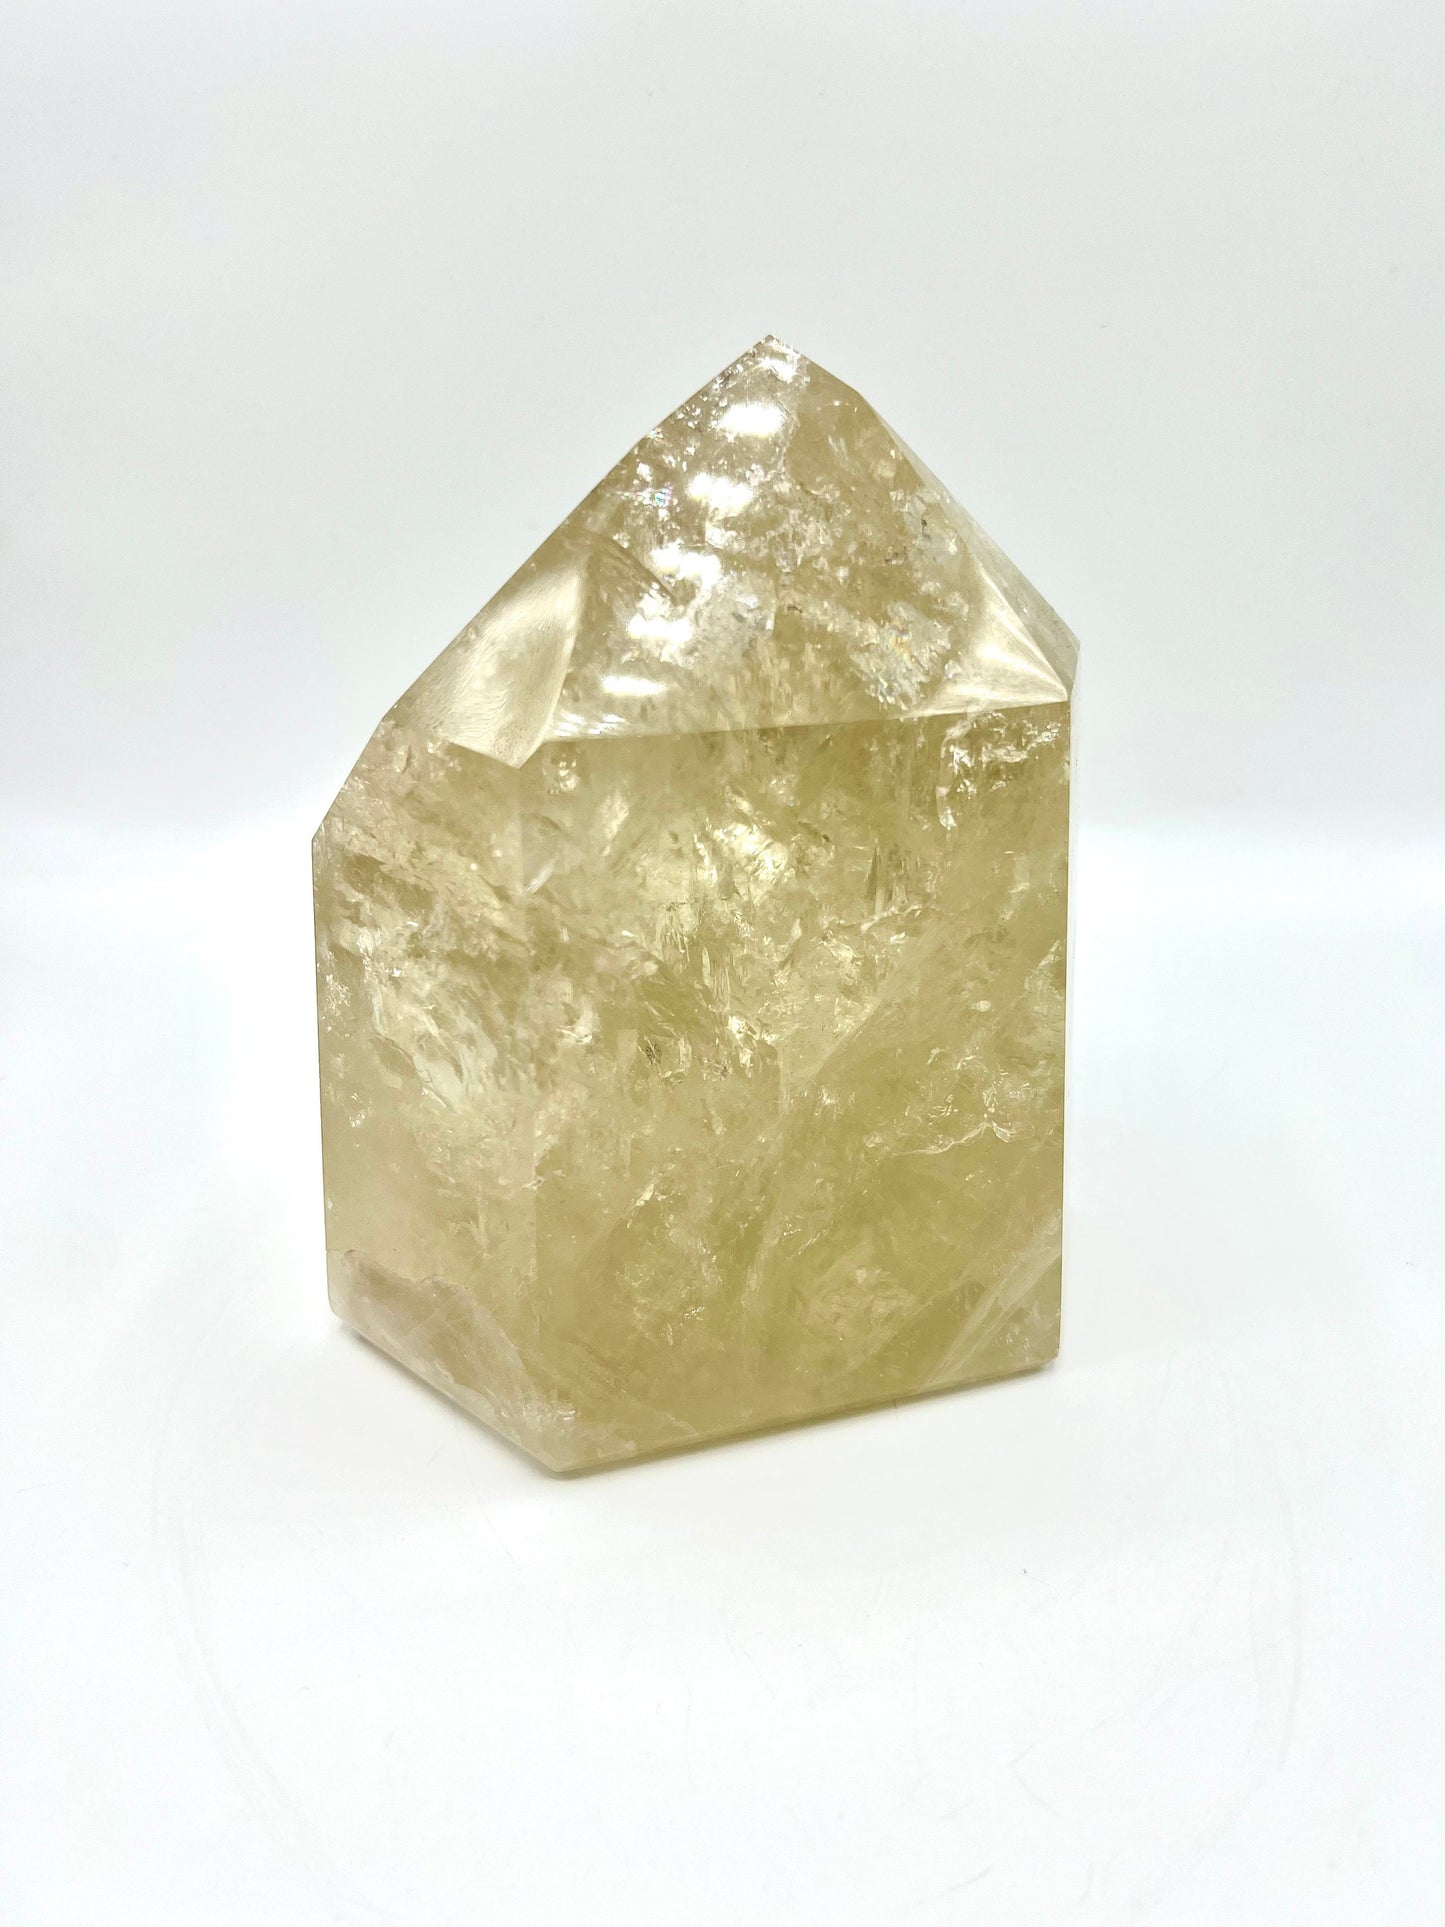 7.2lb  Large Standing Clear Quartz Crystal Tabletop Huge Healing Stone Home decor 6.5" tall